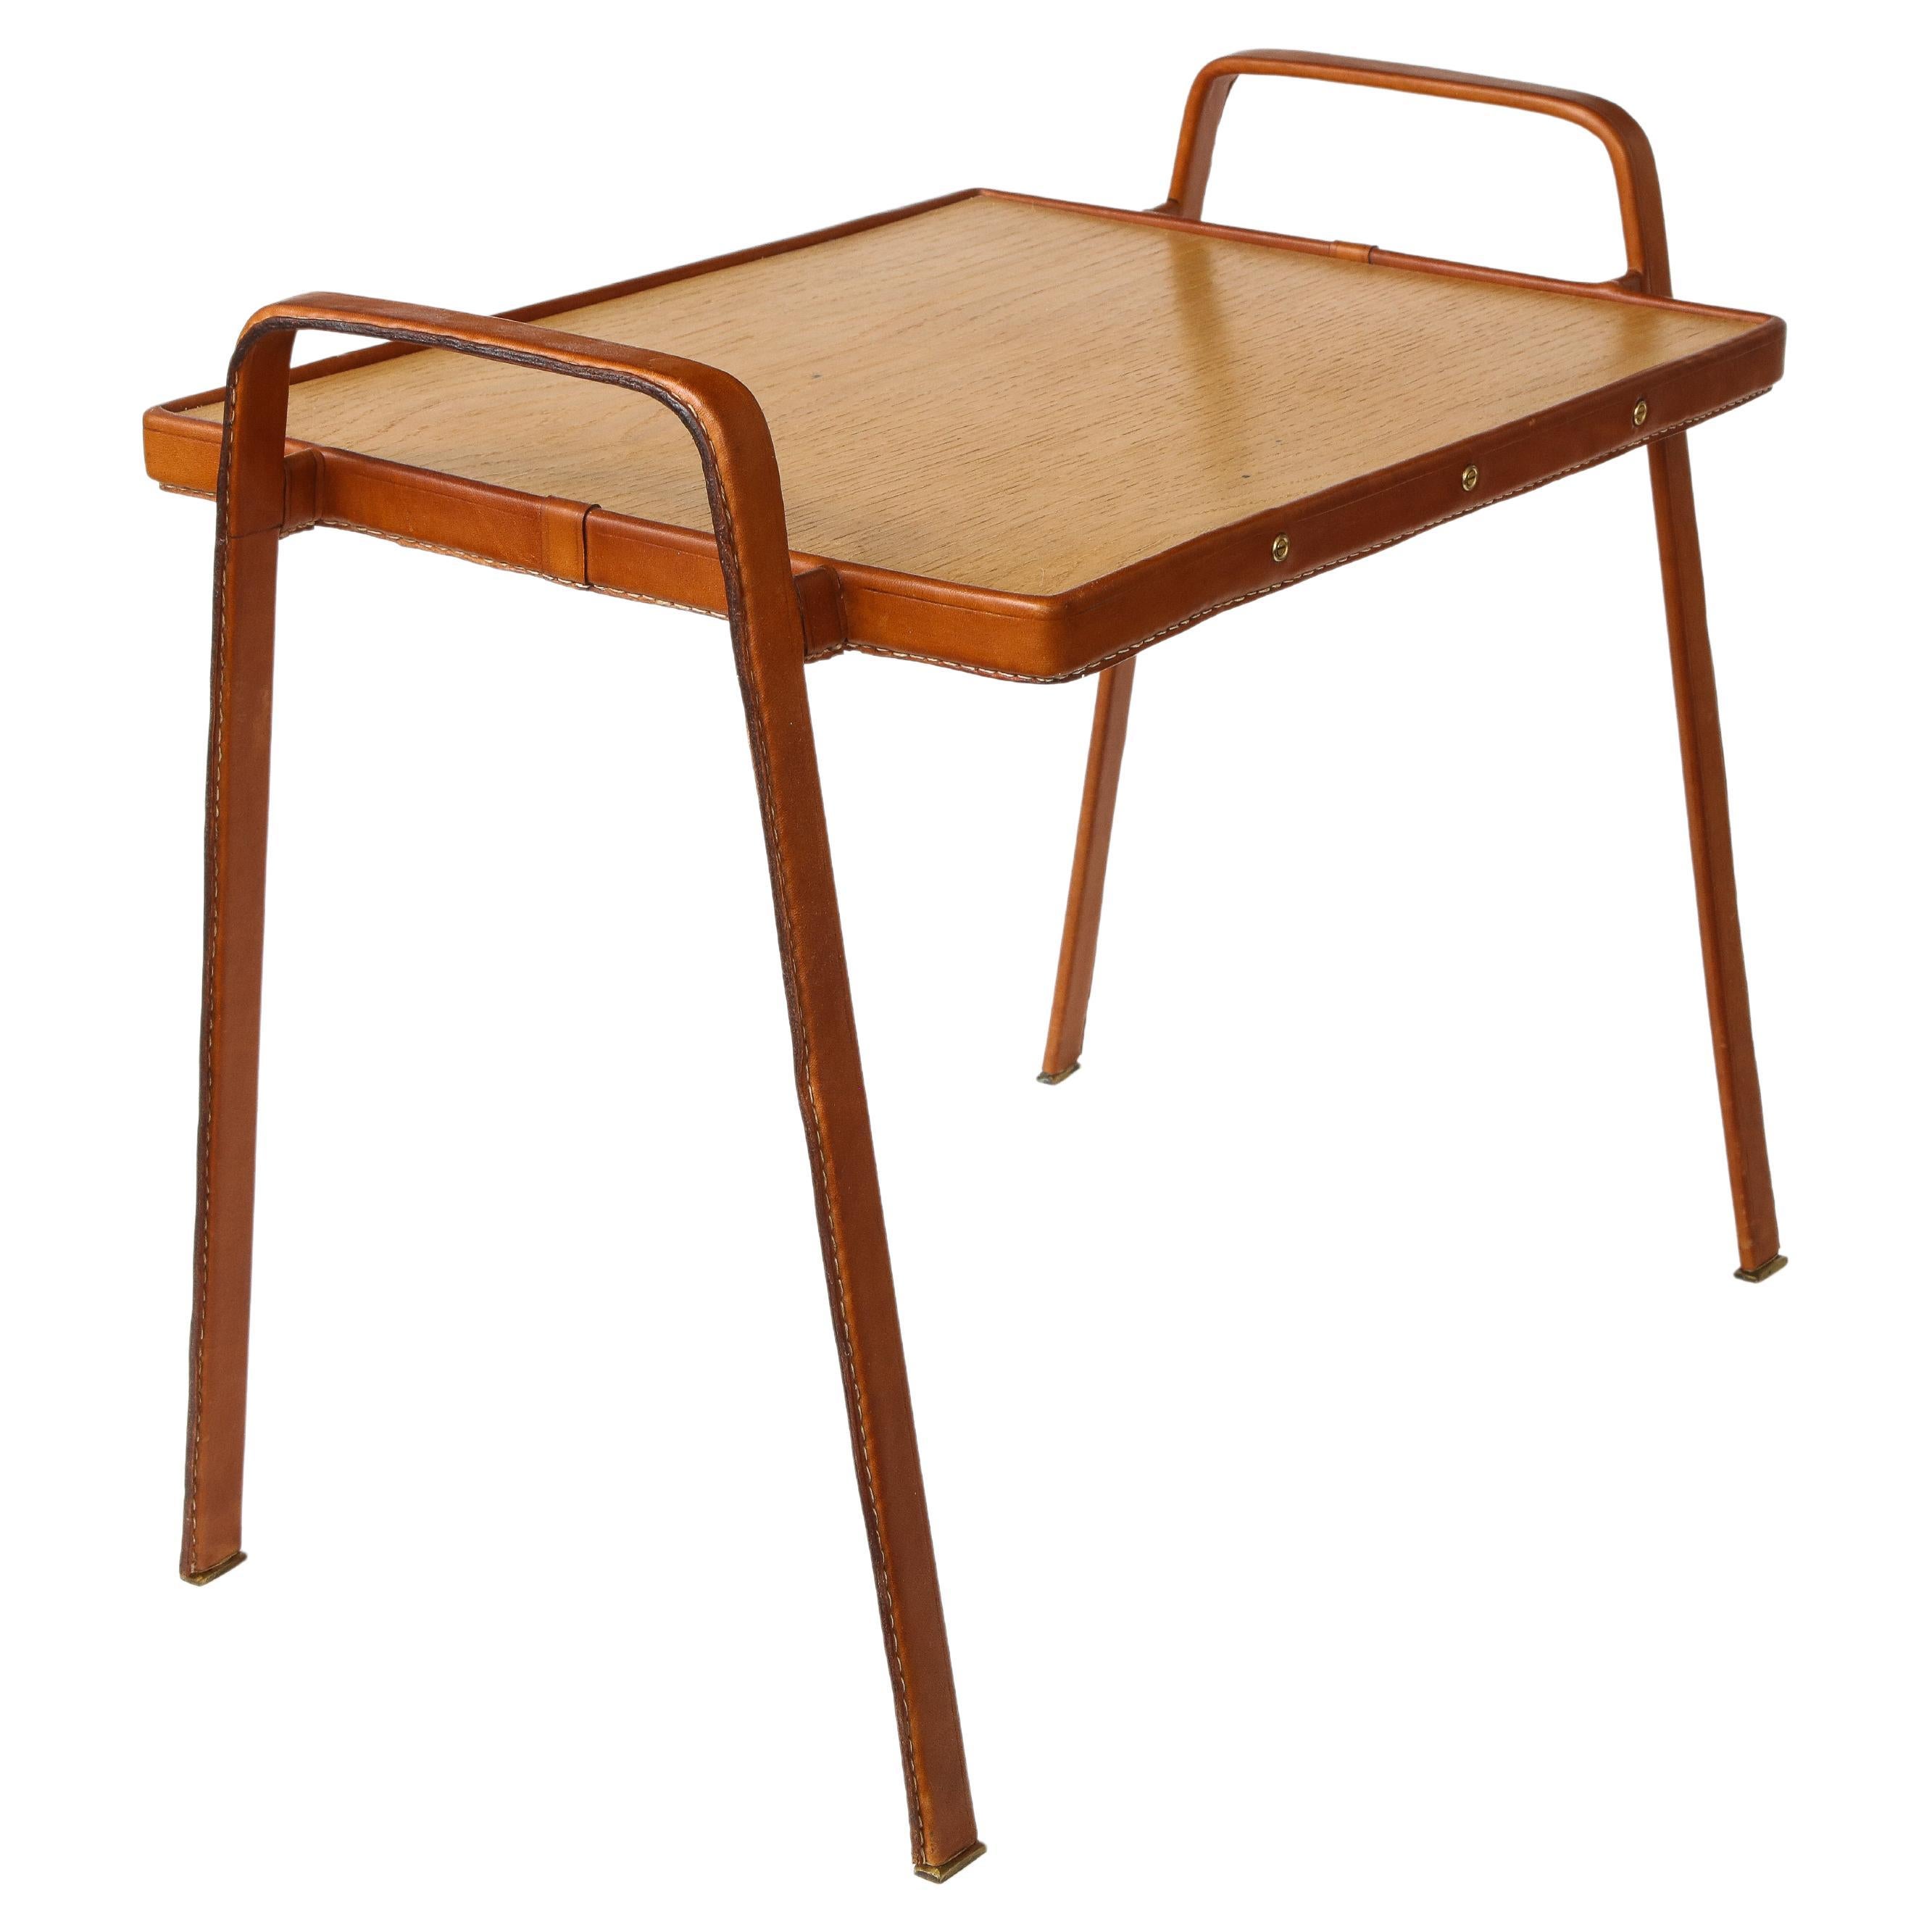 Leather Stitched Side Table by Jacques Adnet, c. 1950 For Sale